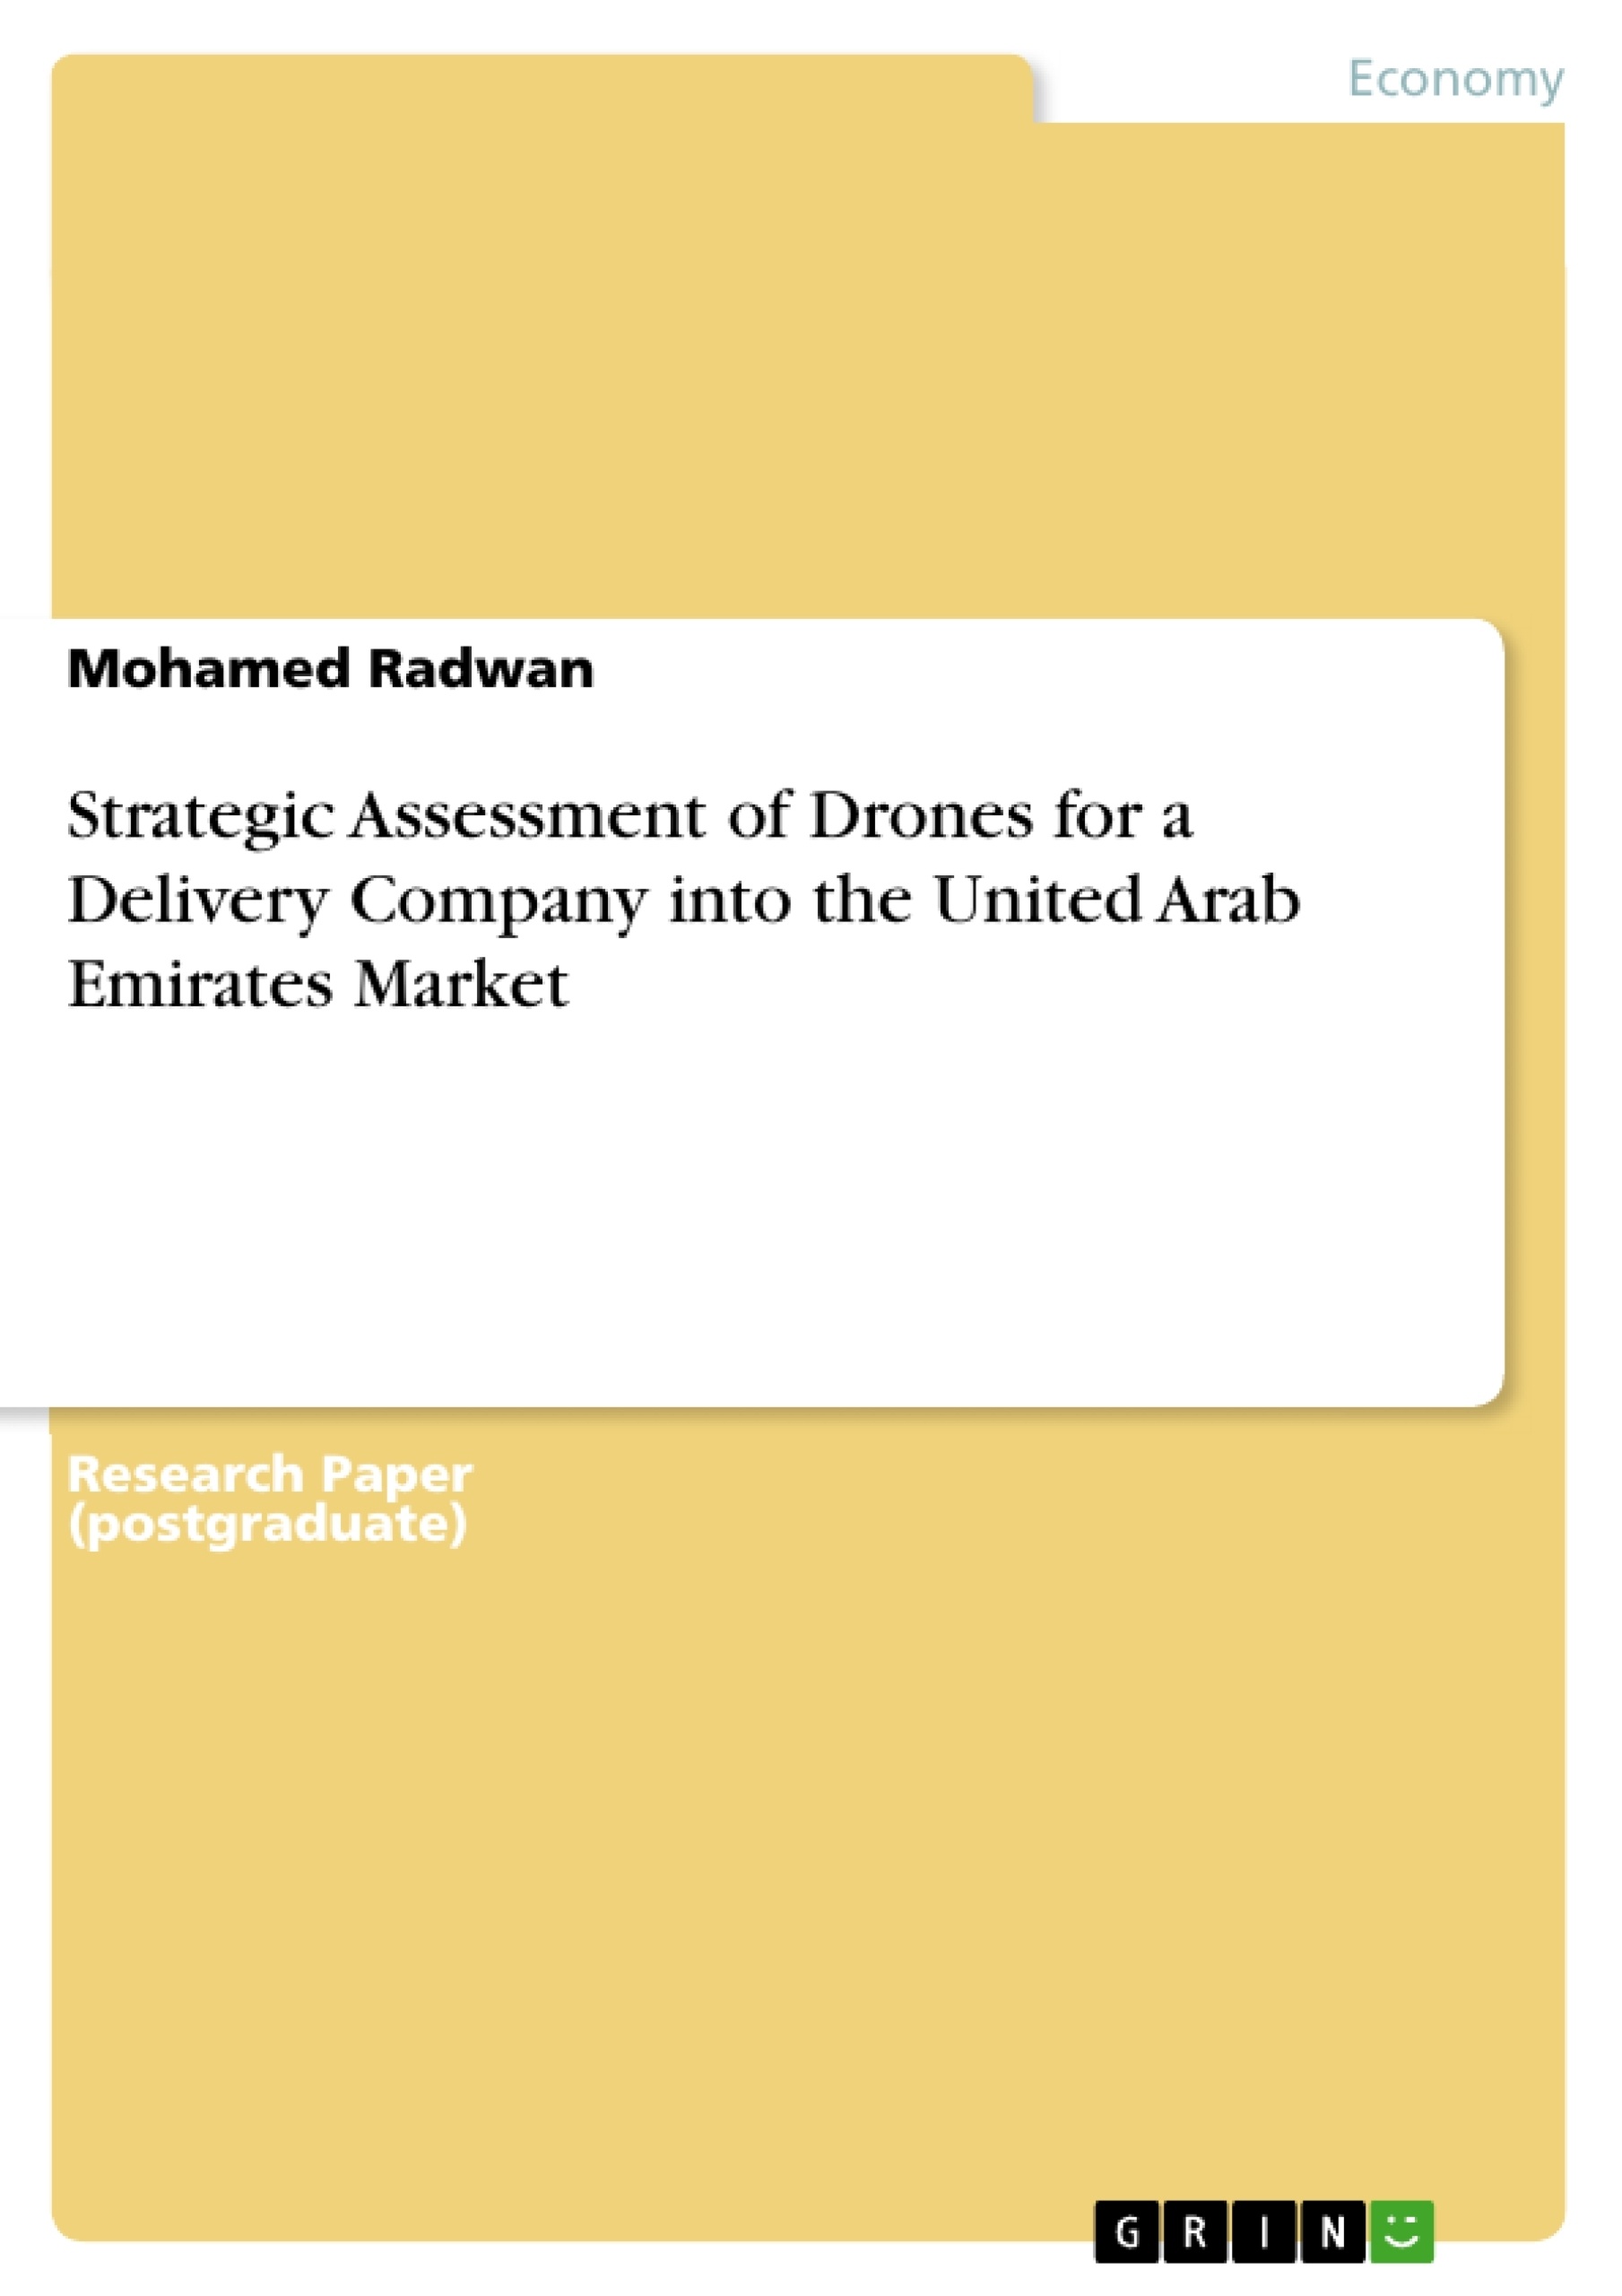 Título: Strategic Assessment of Drones for a Delivery Company into the United Arab Emirates Market